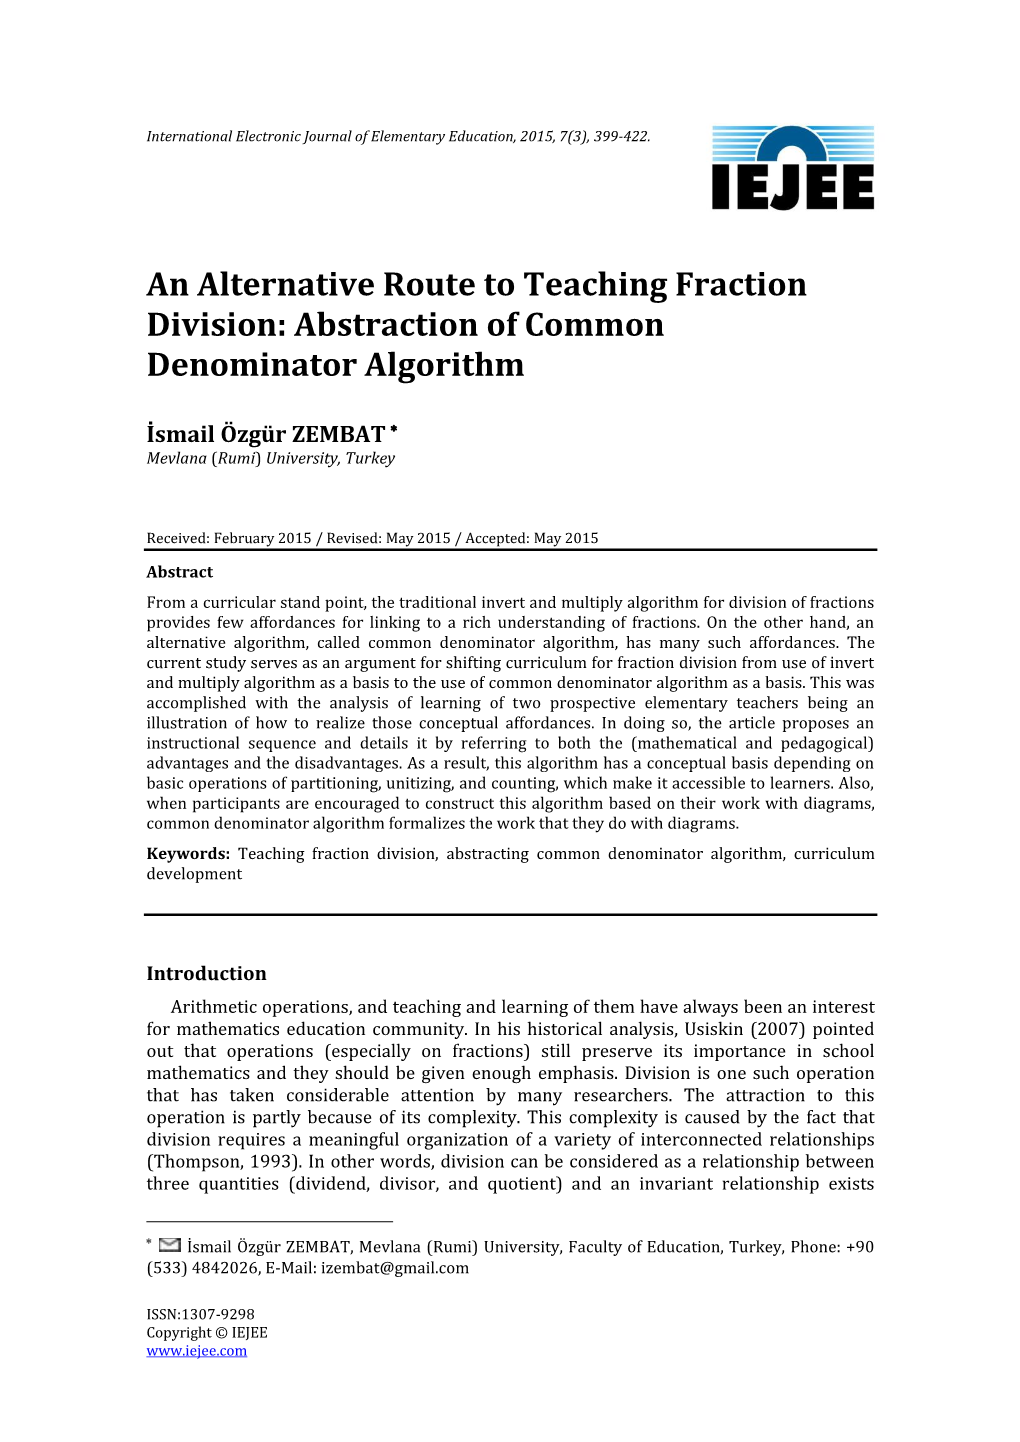 An Alternative Route to Teaching Fraction Division: Abstraction of Common Denominator Algorithm